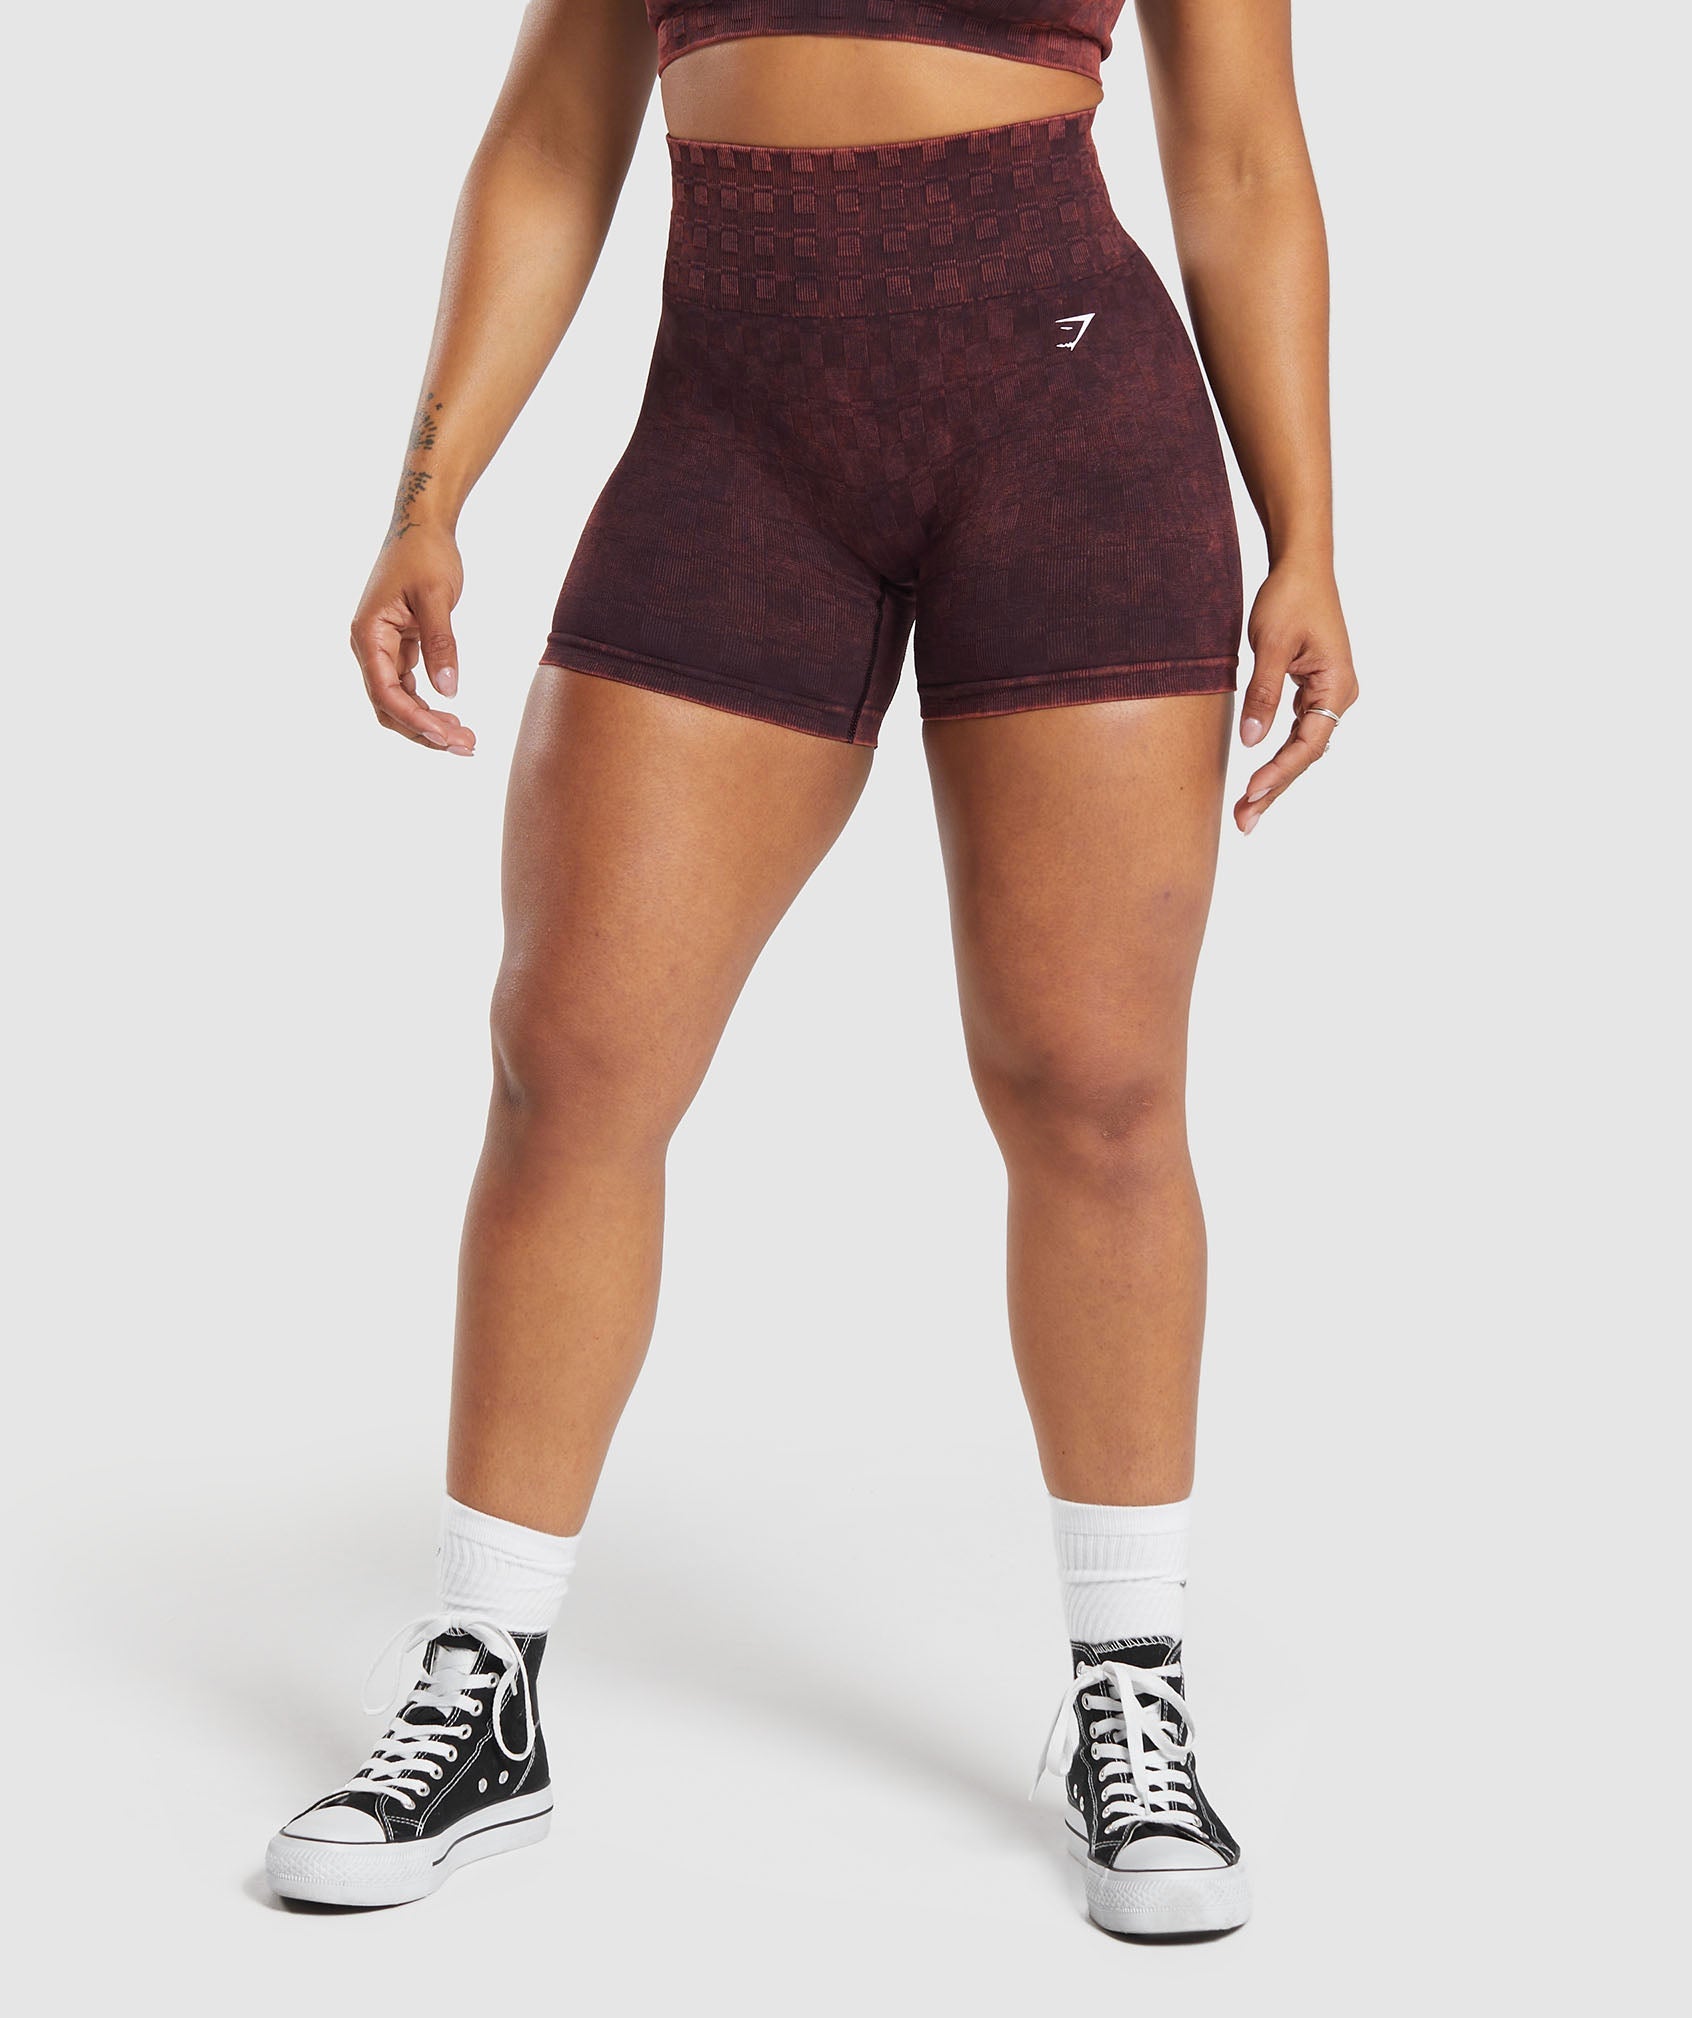 Gymshark Check Seamless Washed Shorts - Plum Brown